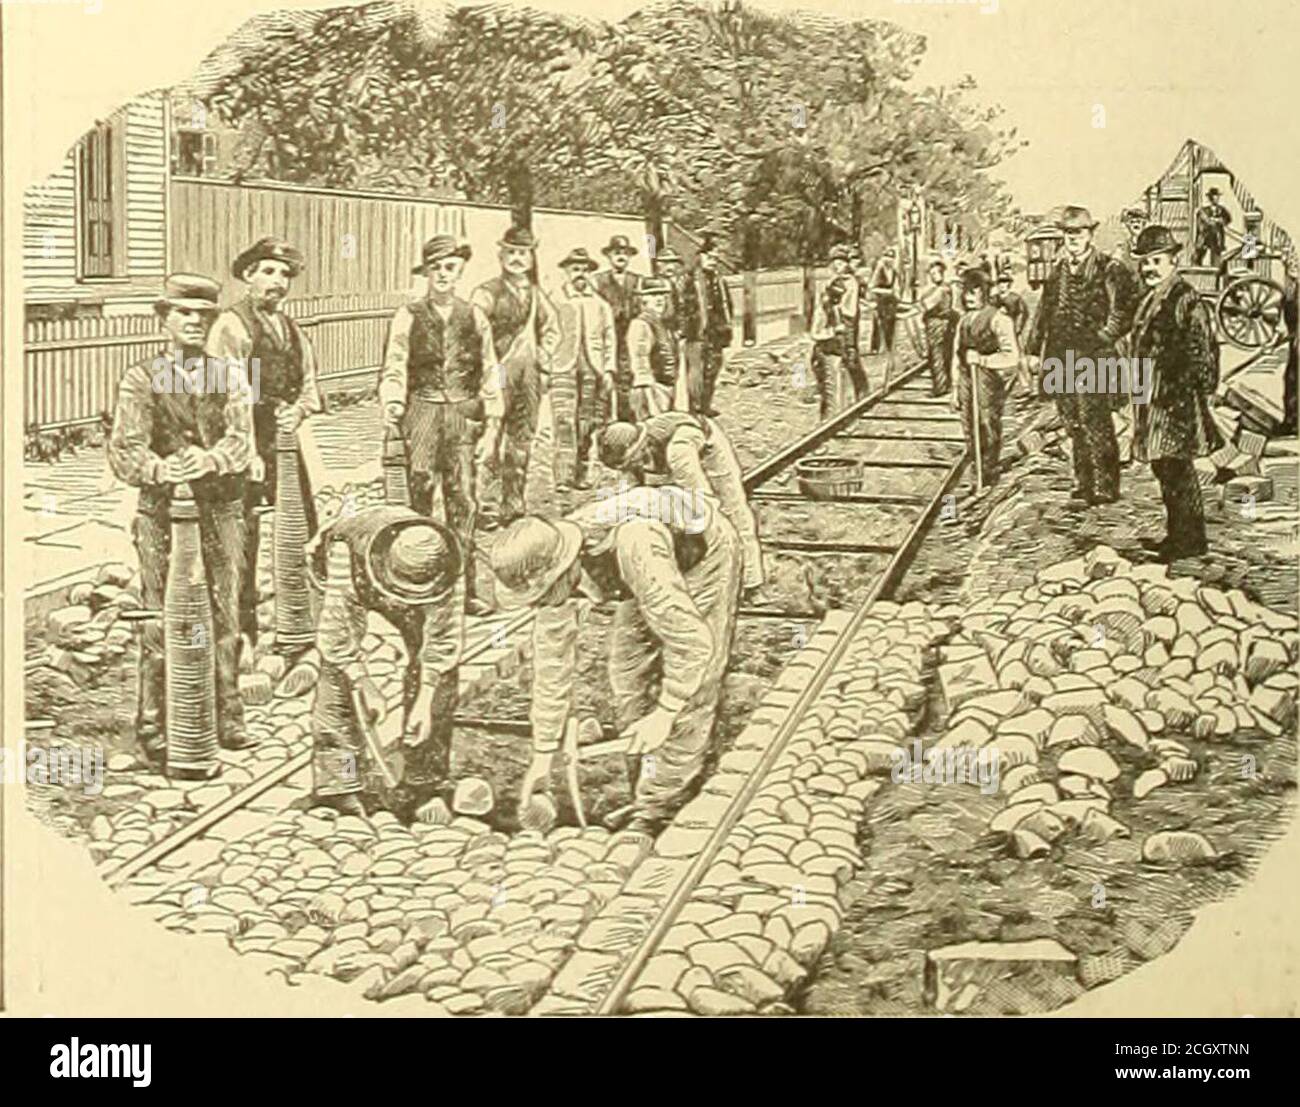 . The Street railway journal . Bradys Patent Couplingand Iron Hame. Most convenient and economical devices known lor street railway harness-sent subject to Inspection berore paying tor them, on application to U. S. HARNESS CO., P. BRAOY, MANAGER, CHICAGO, ILL. ALL IRON AND STEEL. The most permanent and very best formof railroad construction for public streets.Fully endorsed by city and town authori-ties. Send for circular. Prices furnished on application to Wm. Wharton, Jr, &. Co., Lim., Phila., Pa., General Agents,Or D. F. Longstreet, Providence, R. I.. Febrtjaby, 1886.] THE STEEET EAILWAT JO Stock Photo